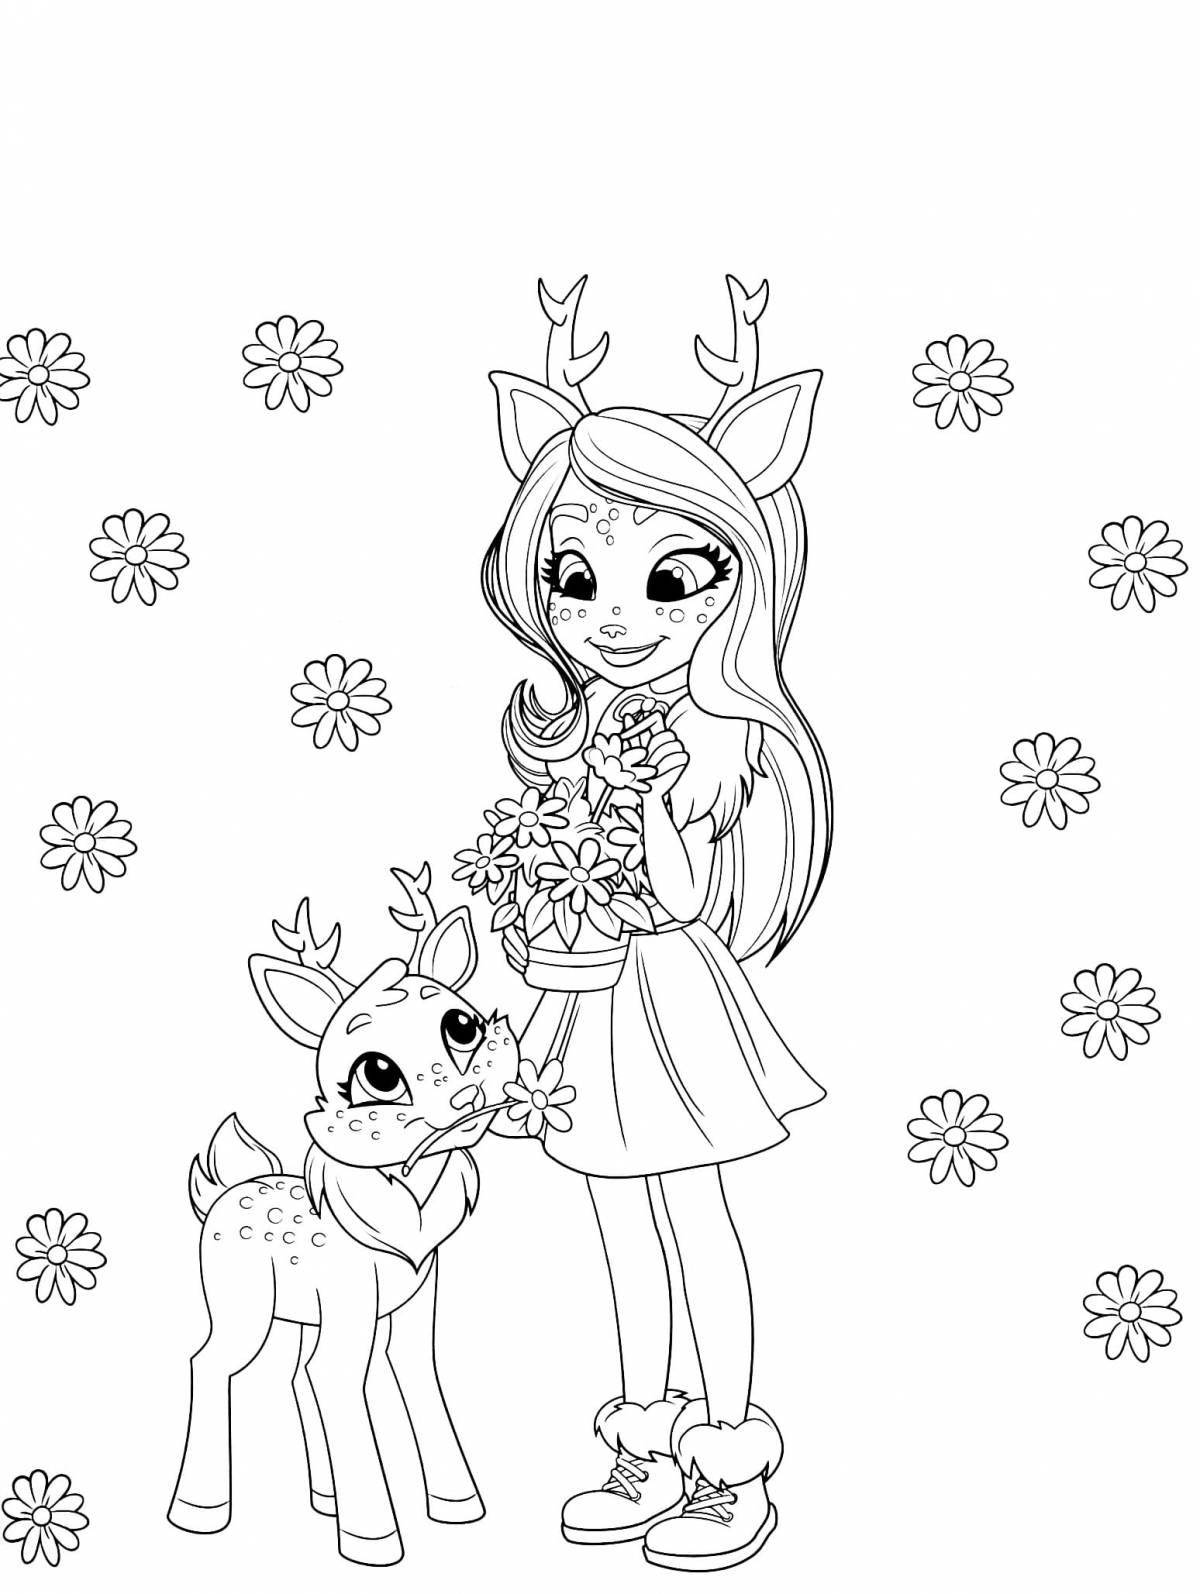 Glittering Enchantimals and Pets Coloring Page